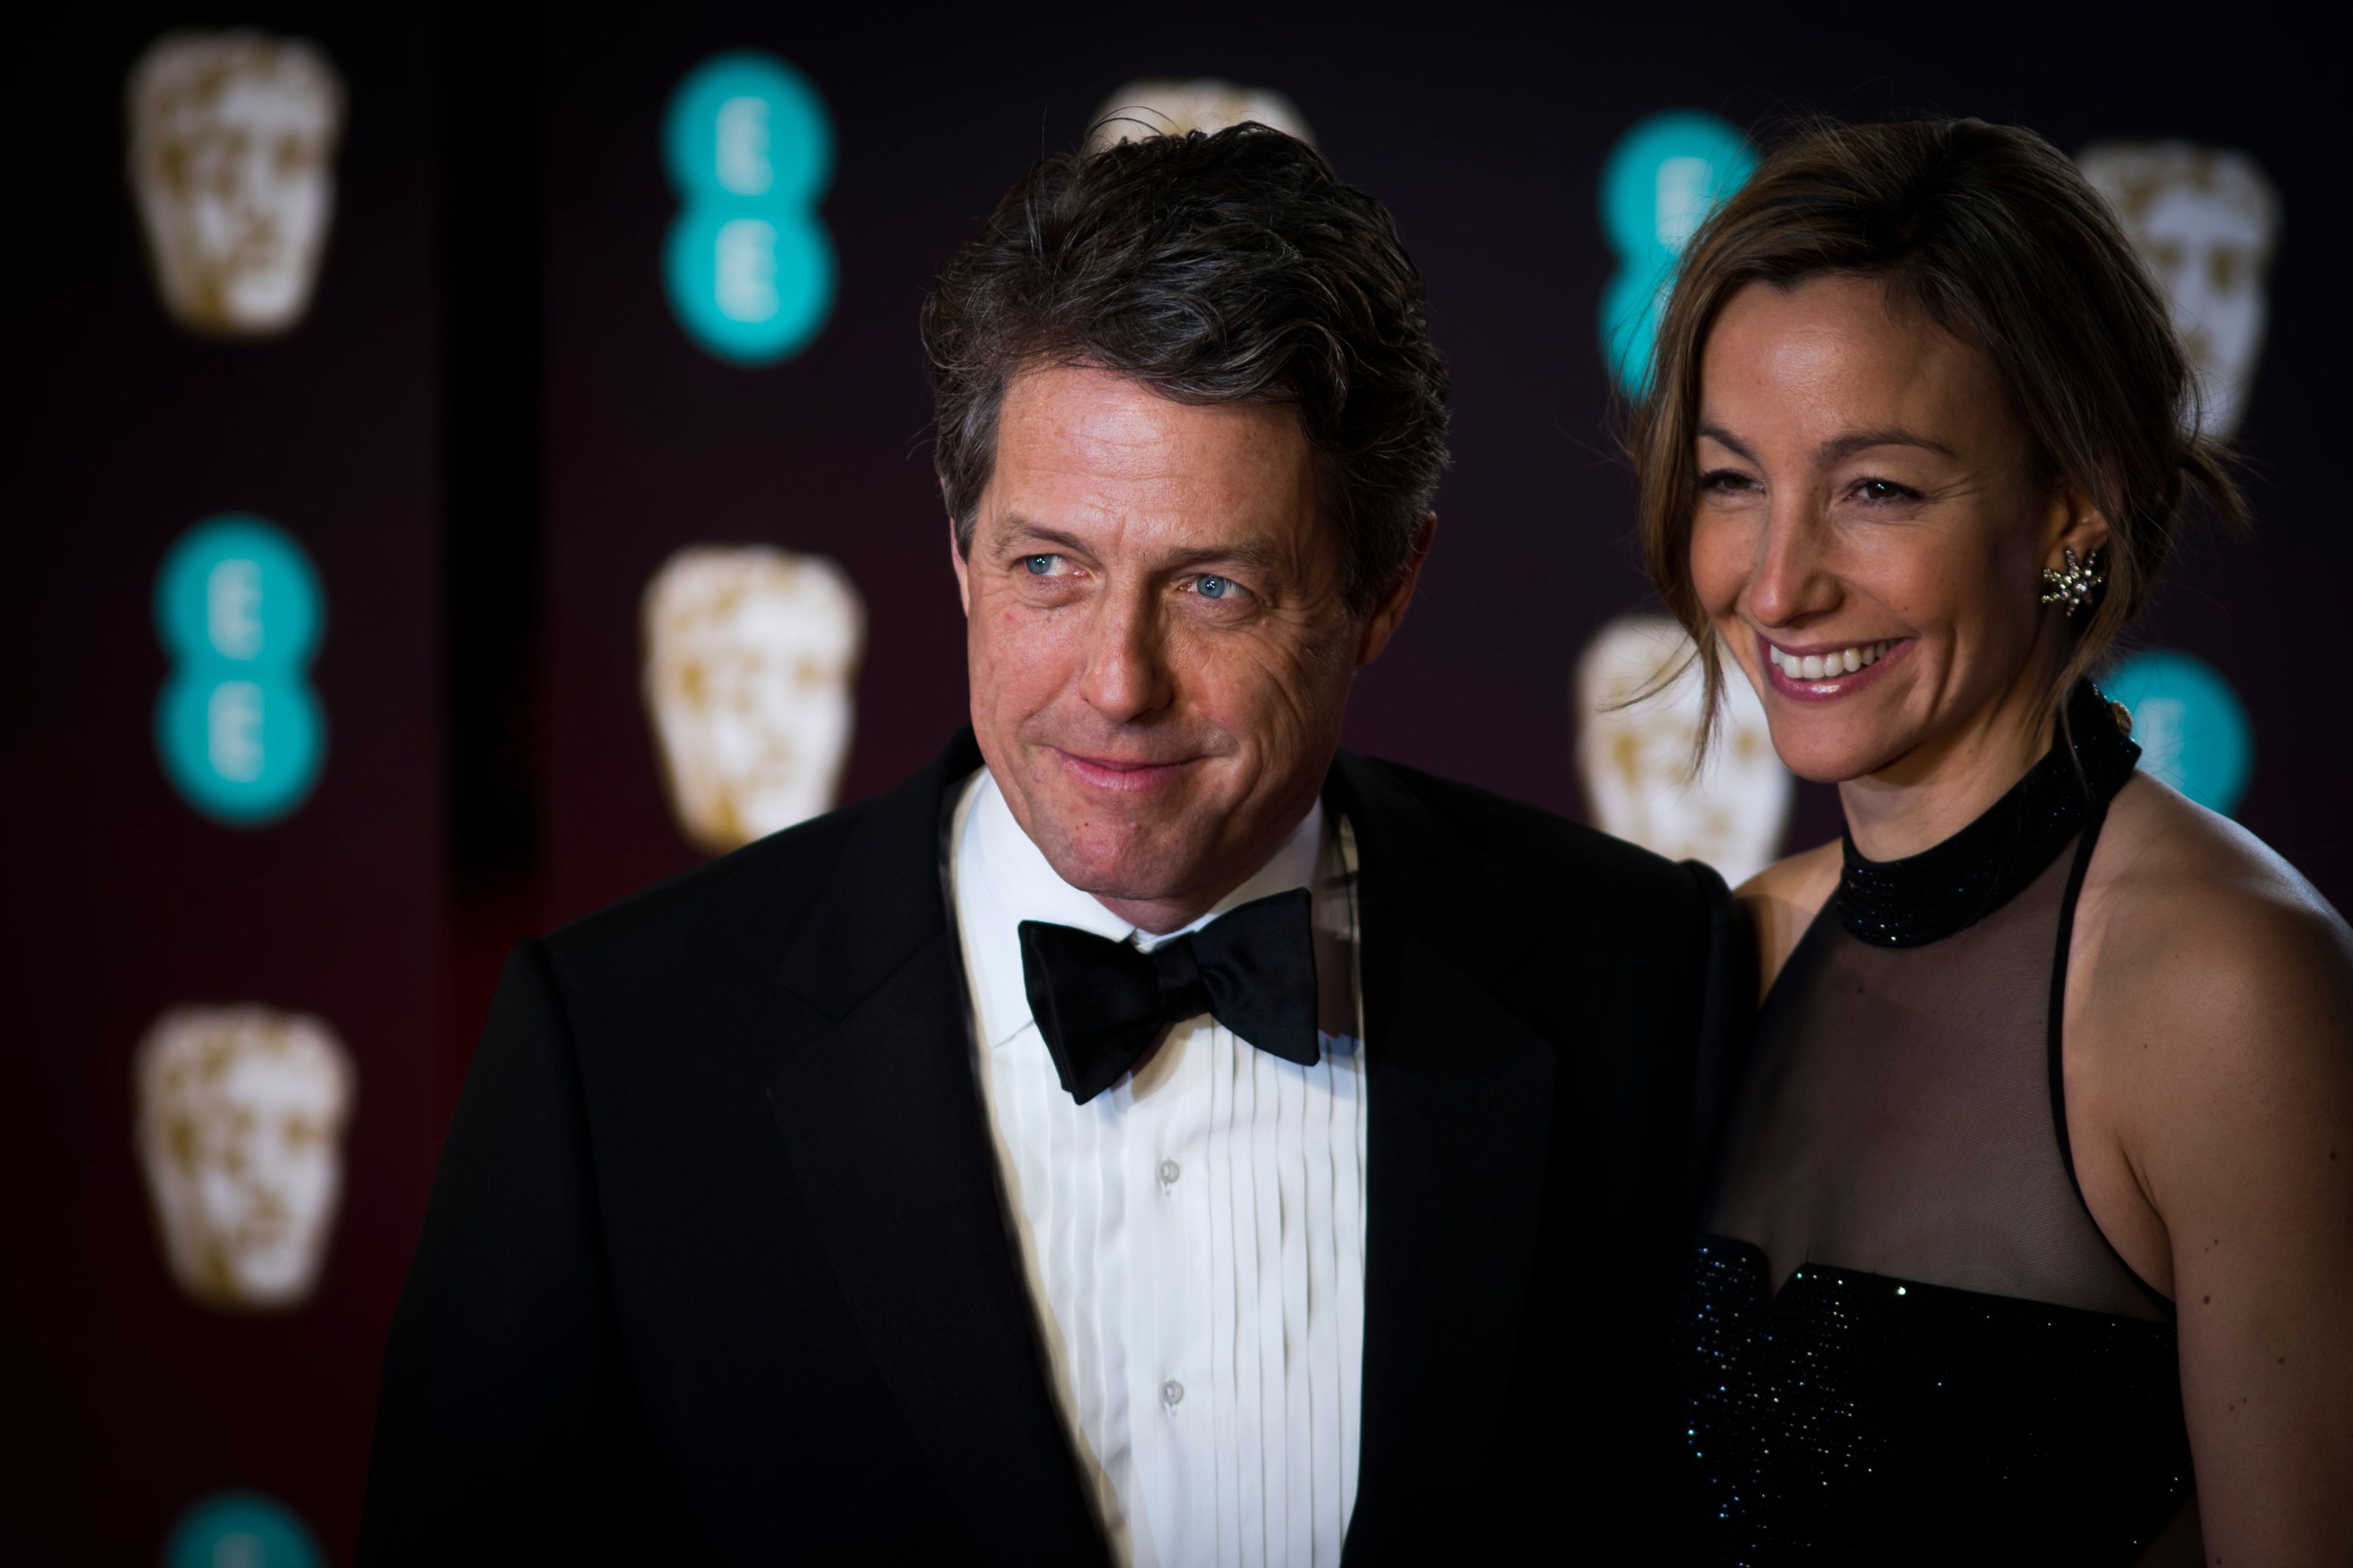 Hugh Grant and Anna Elisabet Eberstein at the 70th EE British Academy Film Awards in 2017, in London, England | Source: Getty Images